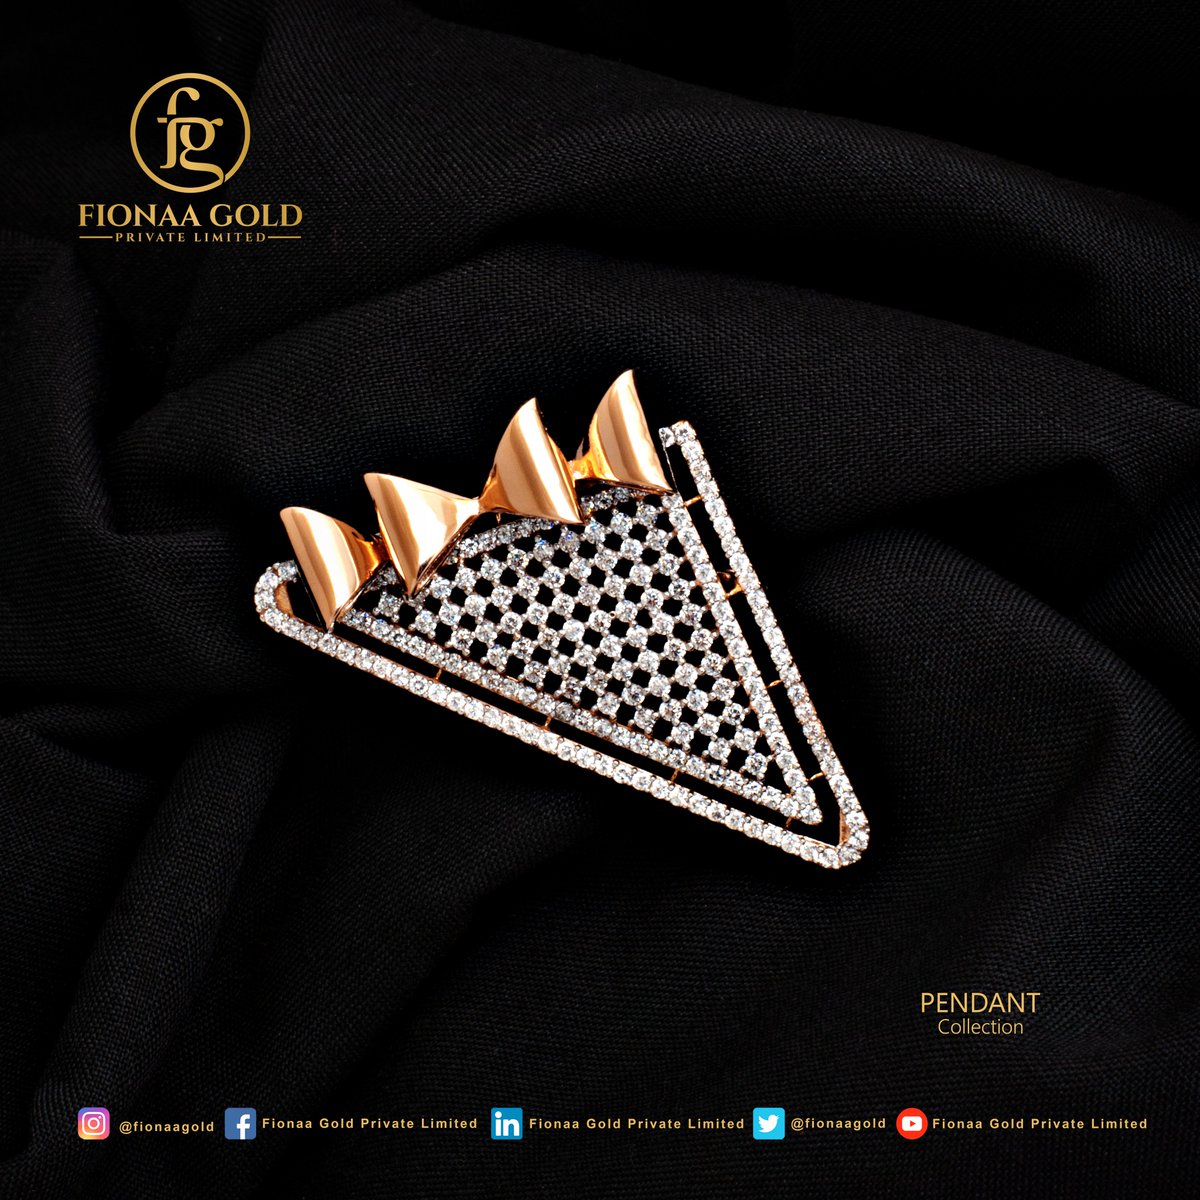 Neckwear without an enchanting pendant stands incomplete. Match your style with #Fionaagold latest collections of stone-studded triangular pendants crafted with an impressive bow.#fionaaBangle #stonependants #diamondpendant #pendantcollection #pendantdesign #designerpendants